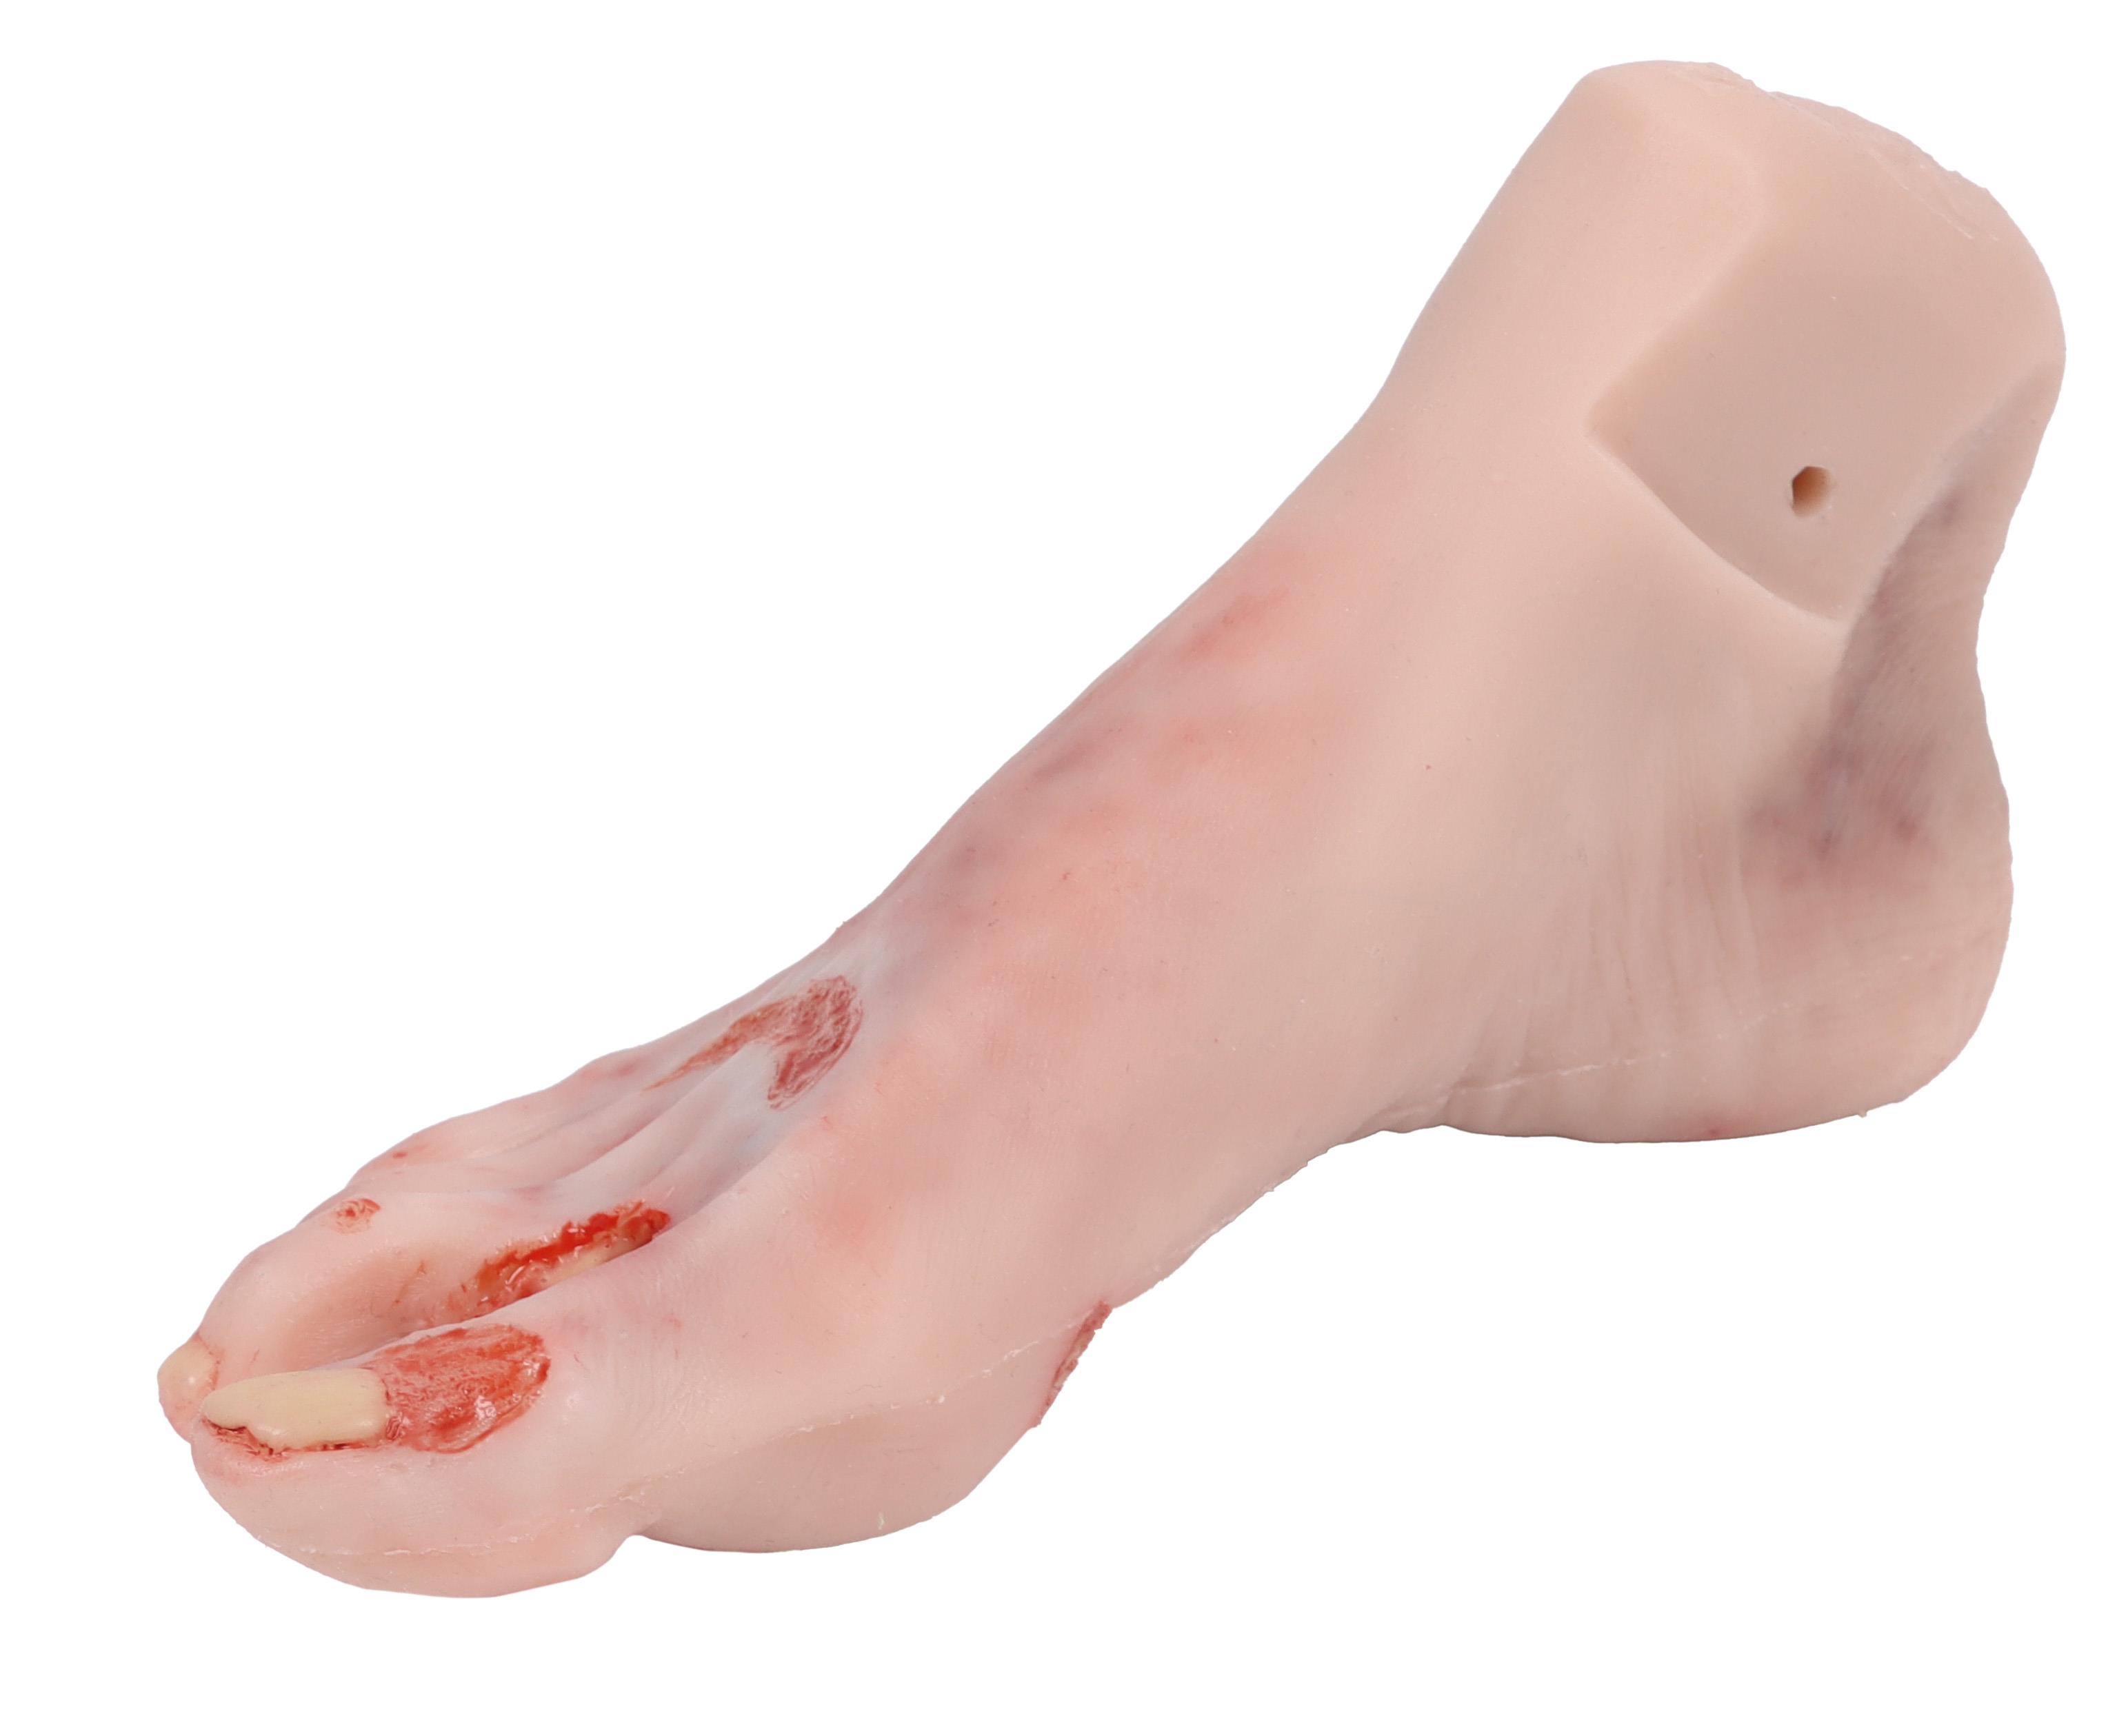 Wound-foot-with-diabetic-foot-syndrome-severe-stage-manikin-version-3